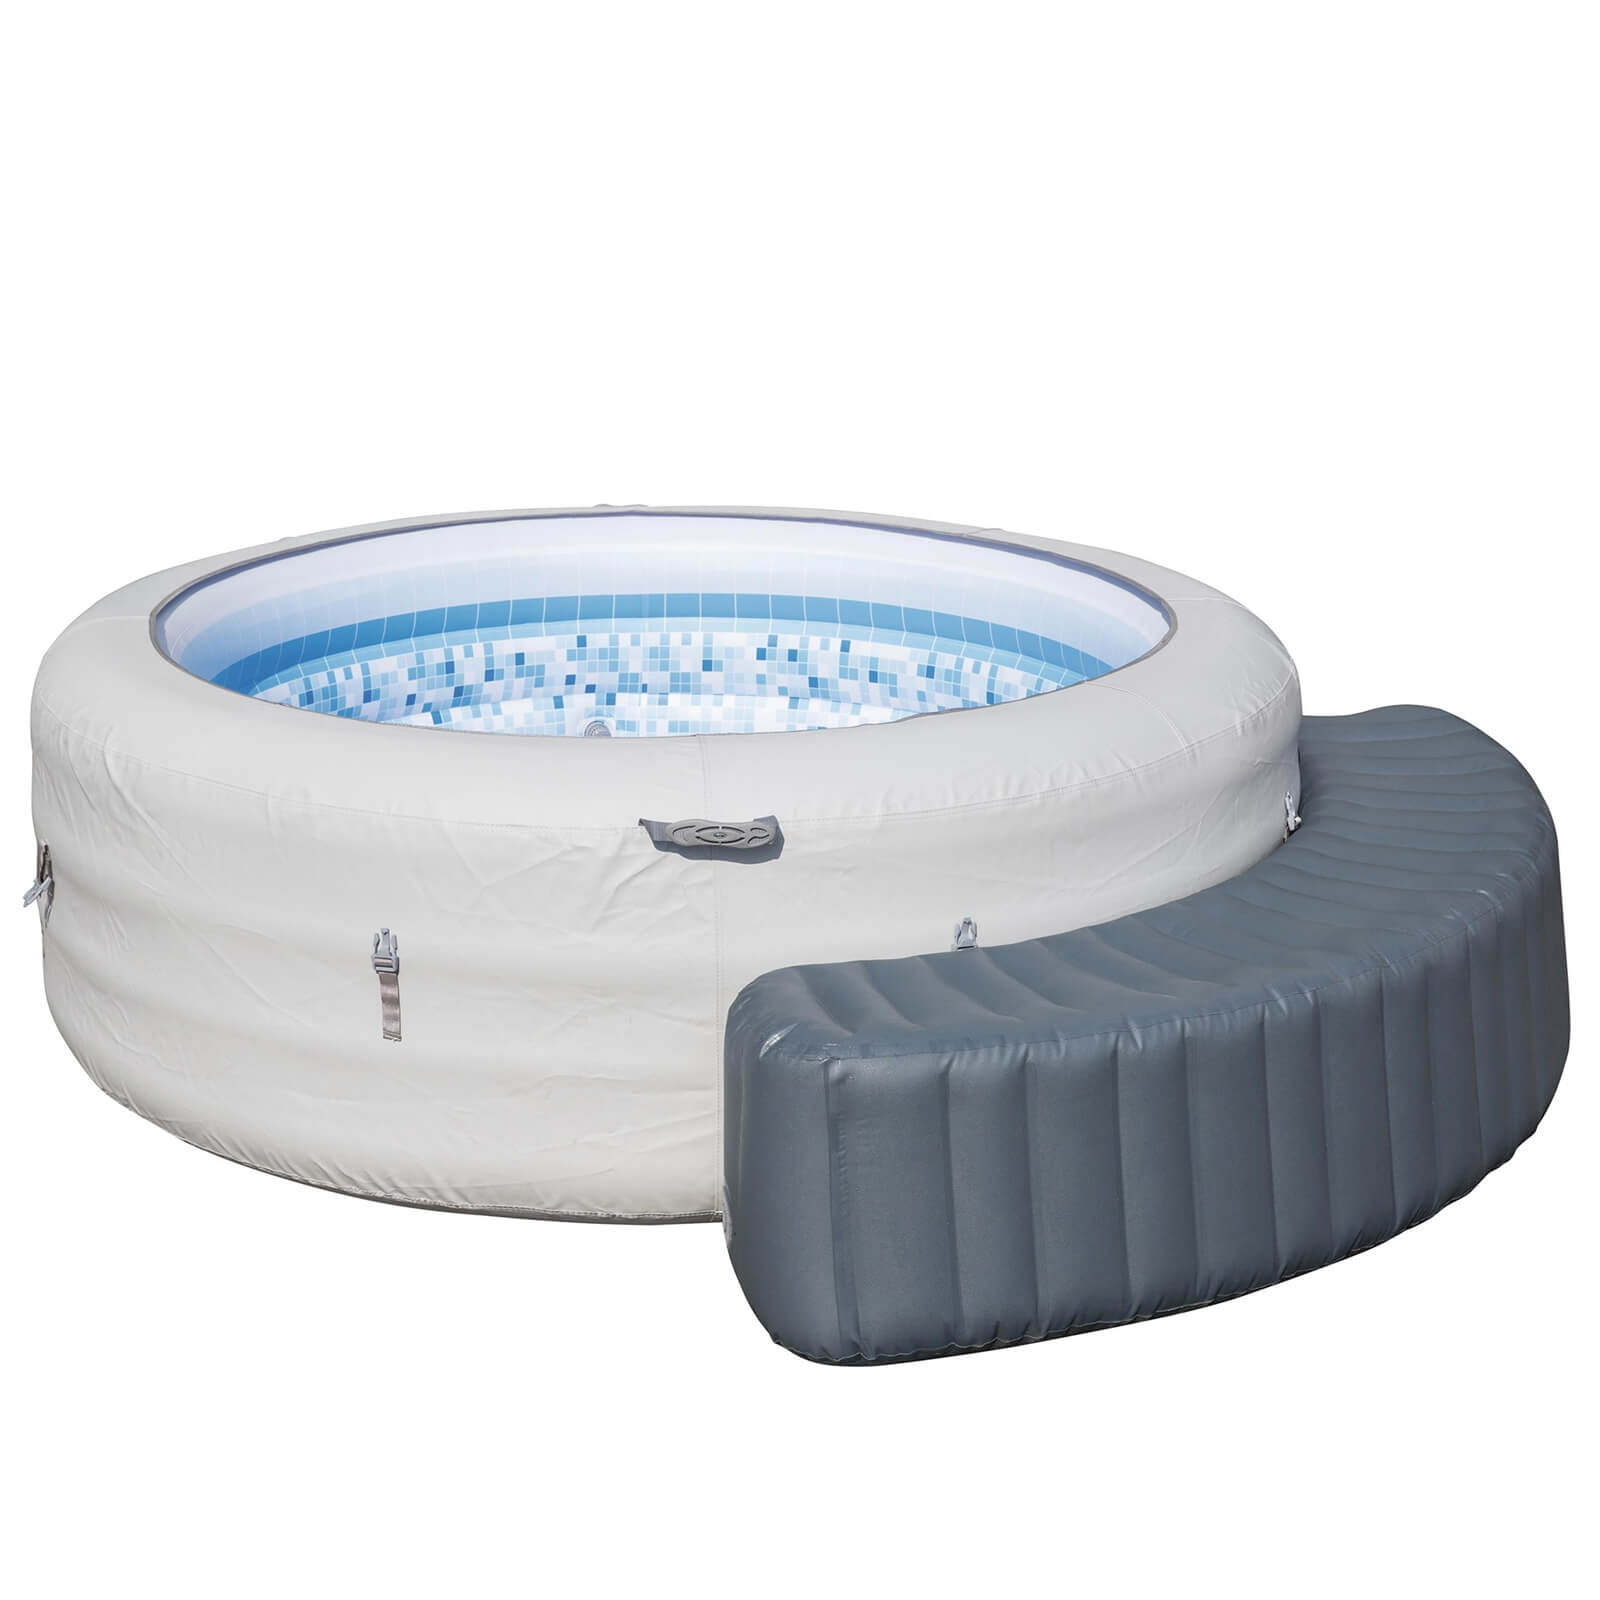 Lay-Z-Spa Inflatable Surround